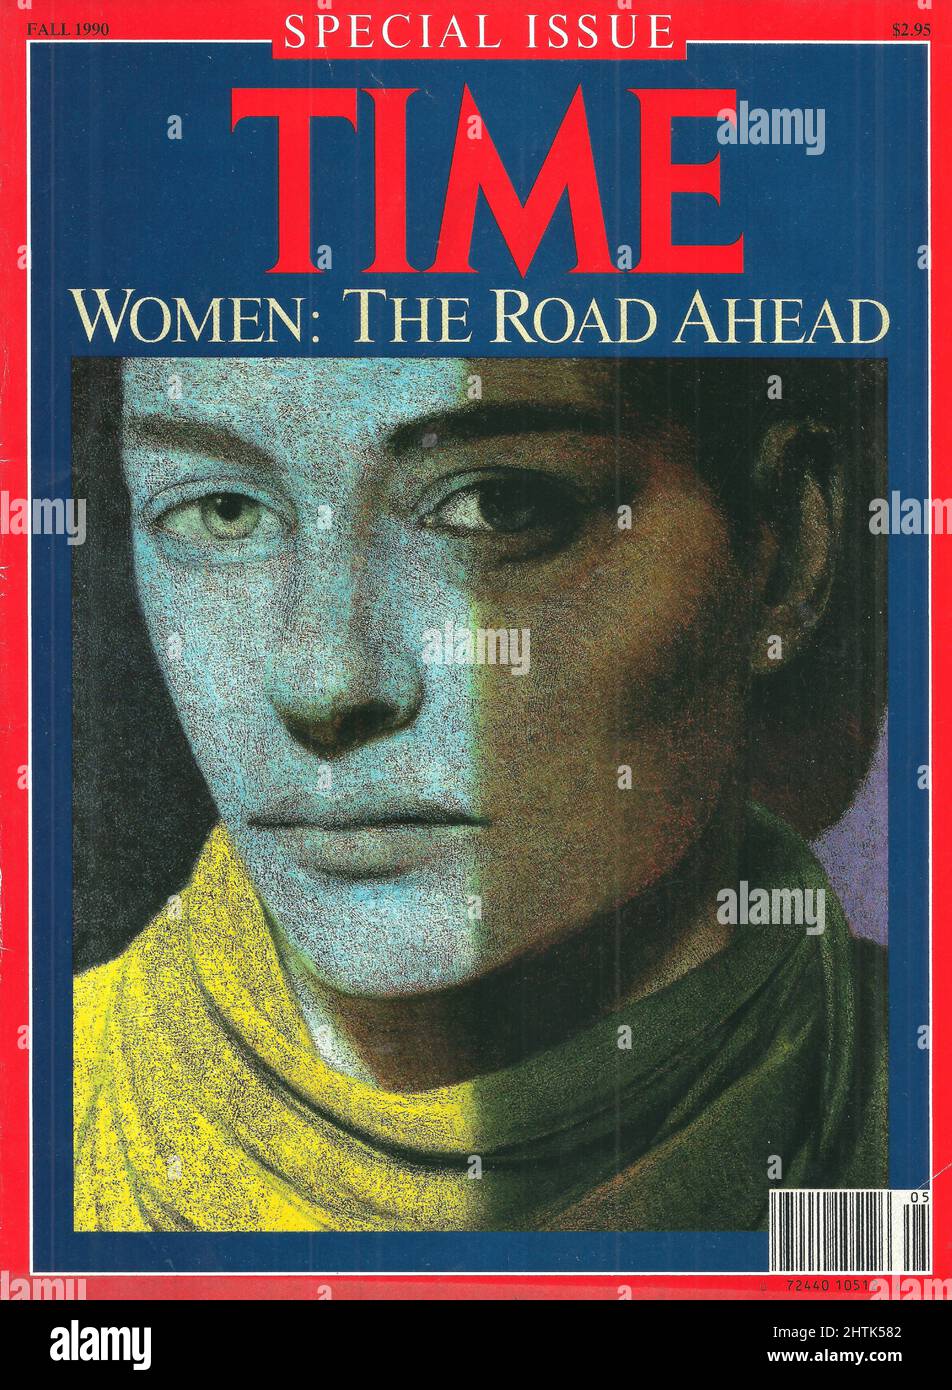 Time magazine cover Women: The Road Ahead Time cover Special issue Fall 1990 Stock Photo